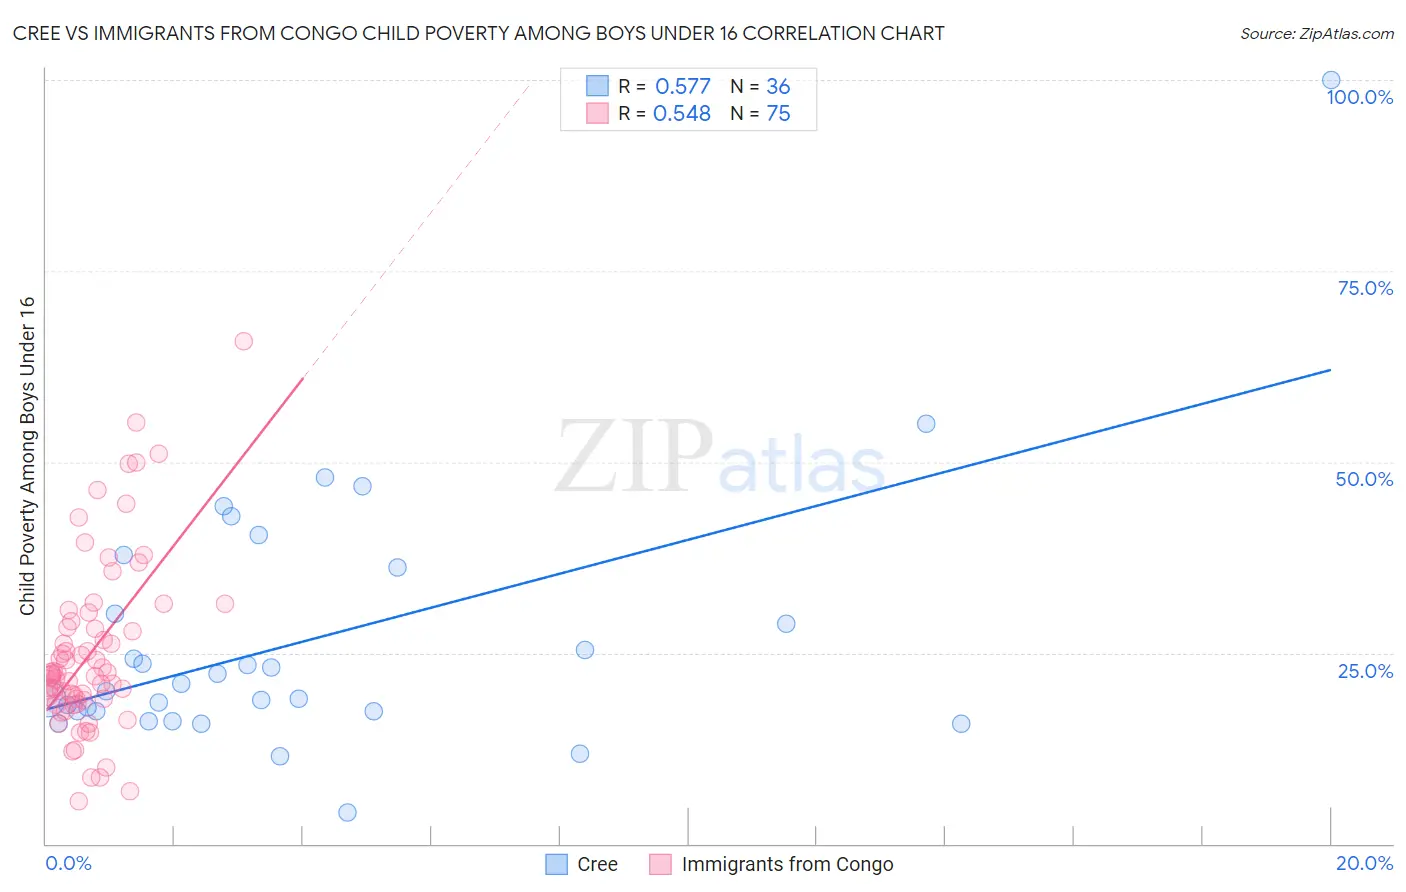 Cree vs Immigrants from Congo Child Poverty Among Boys Under 16